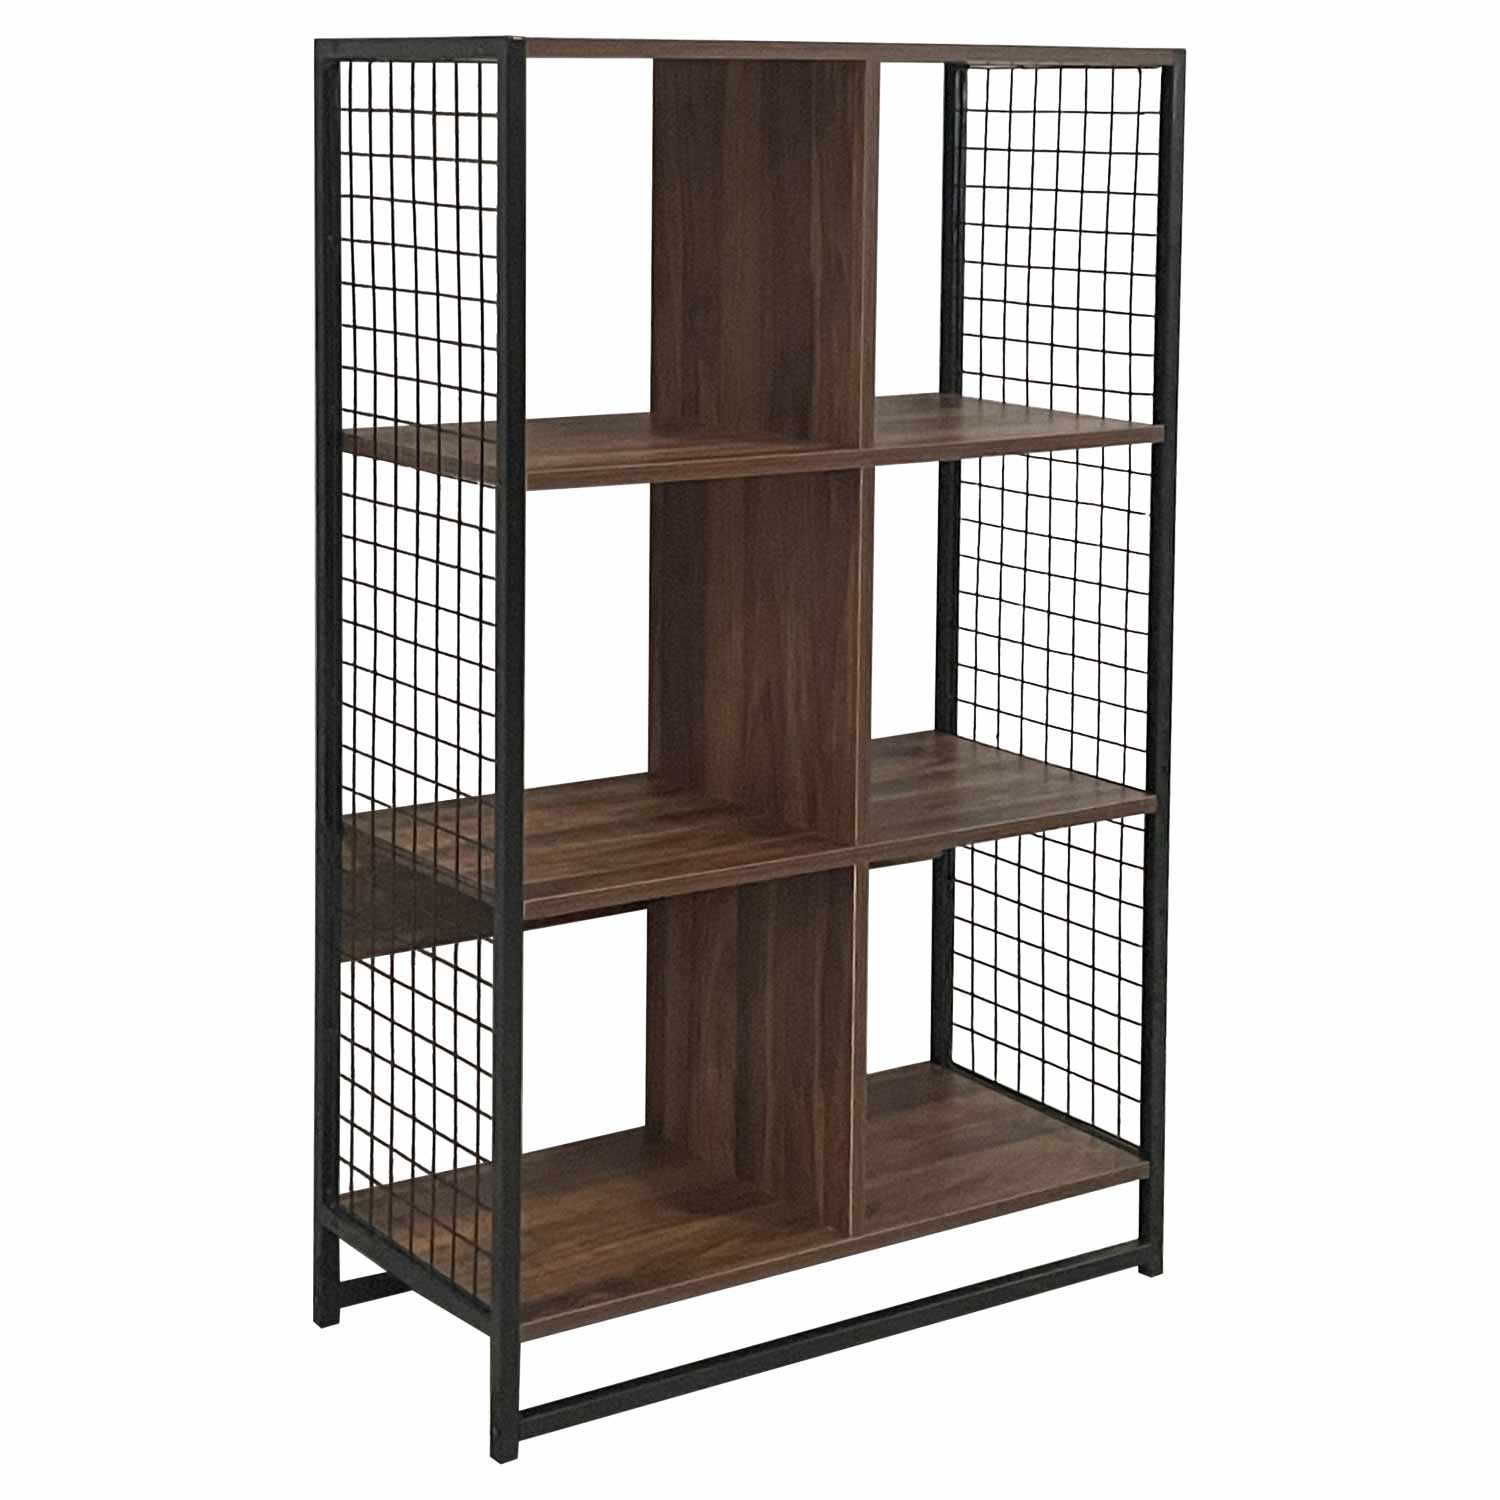 Free-standing 3-tier shelving unit, 6-cube, wood grain and metal wire mesh